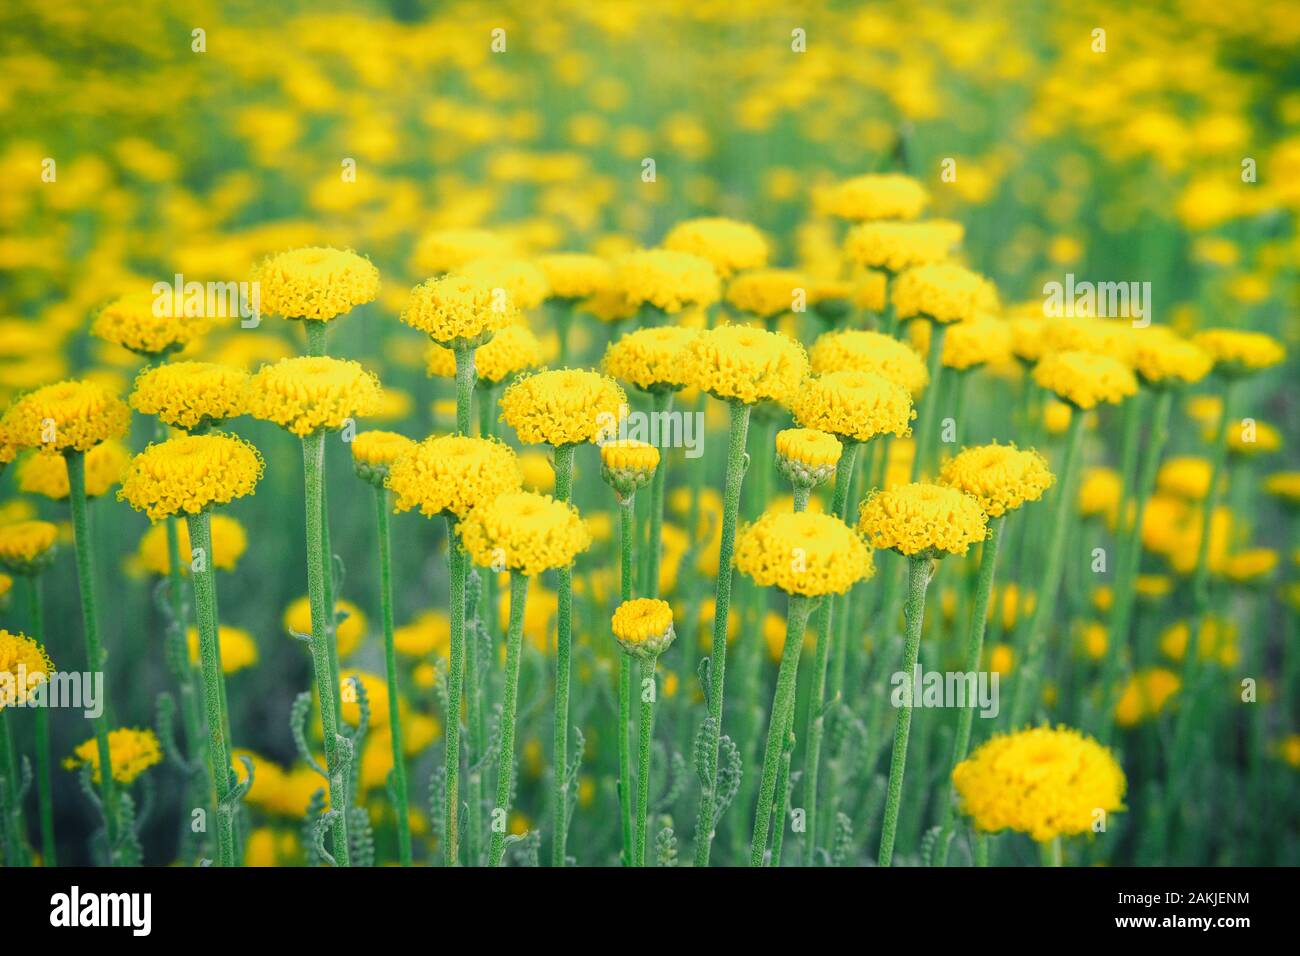 Helichrysum flowers on green nature blurred background. Yellow flowers is blooming. Medicinal herb therapy. Stock Photo